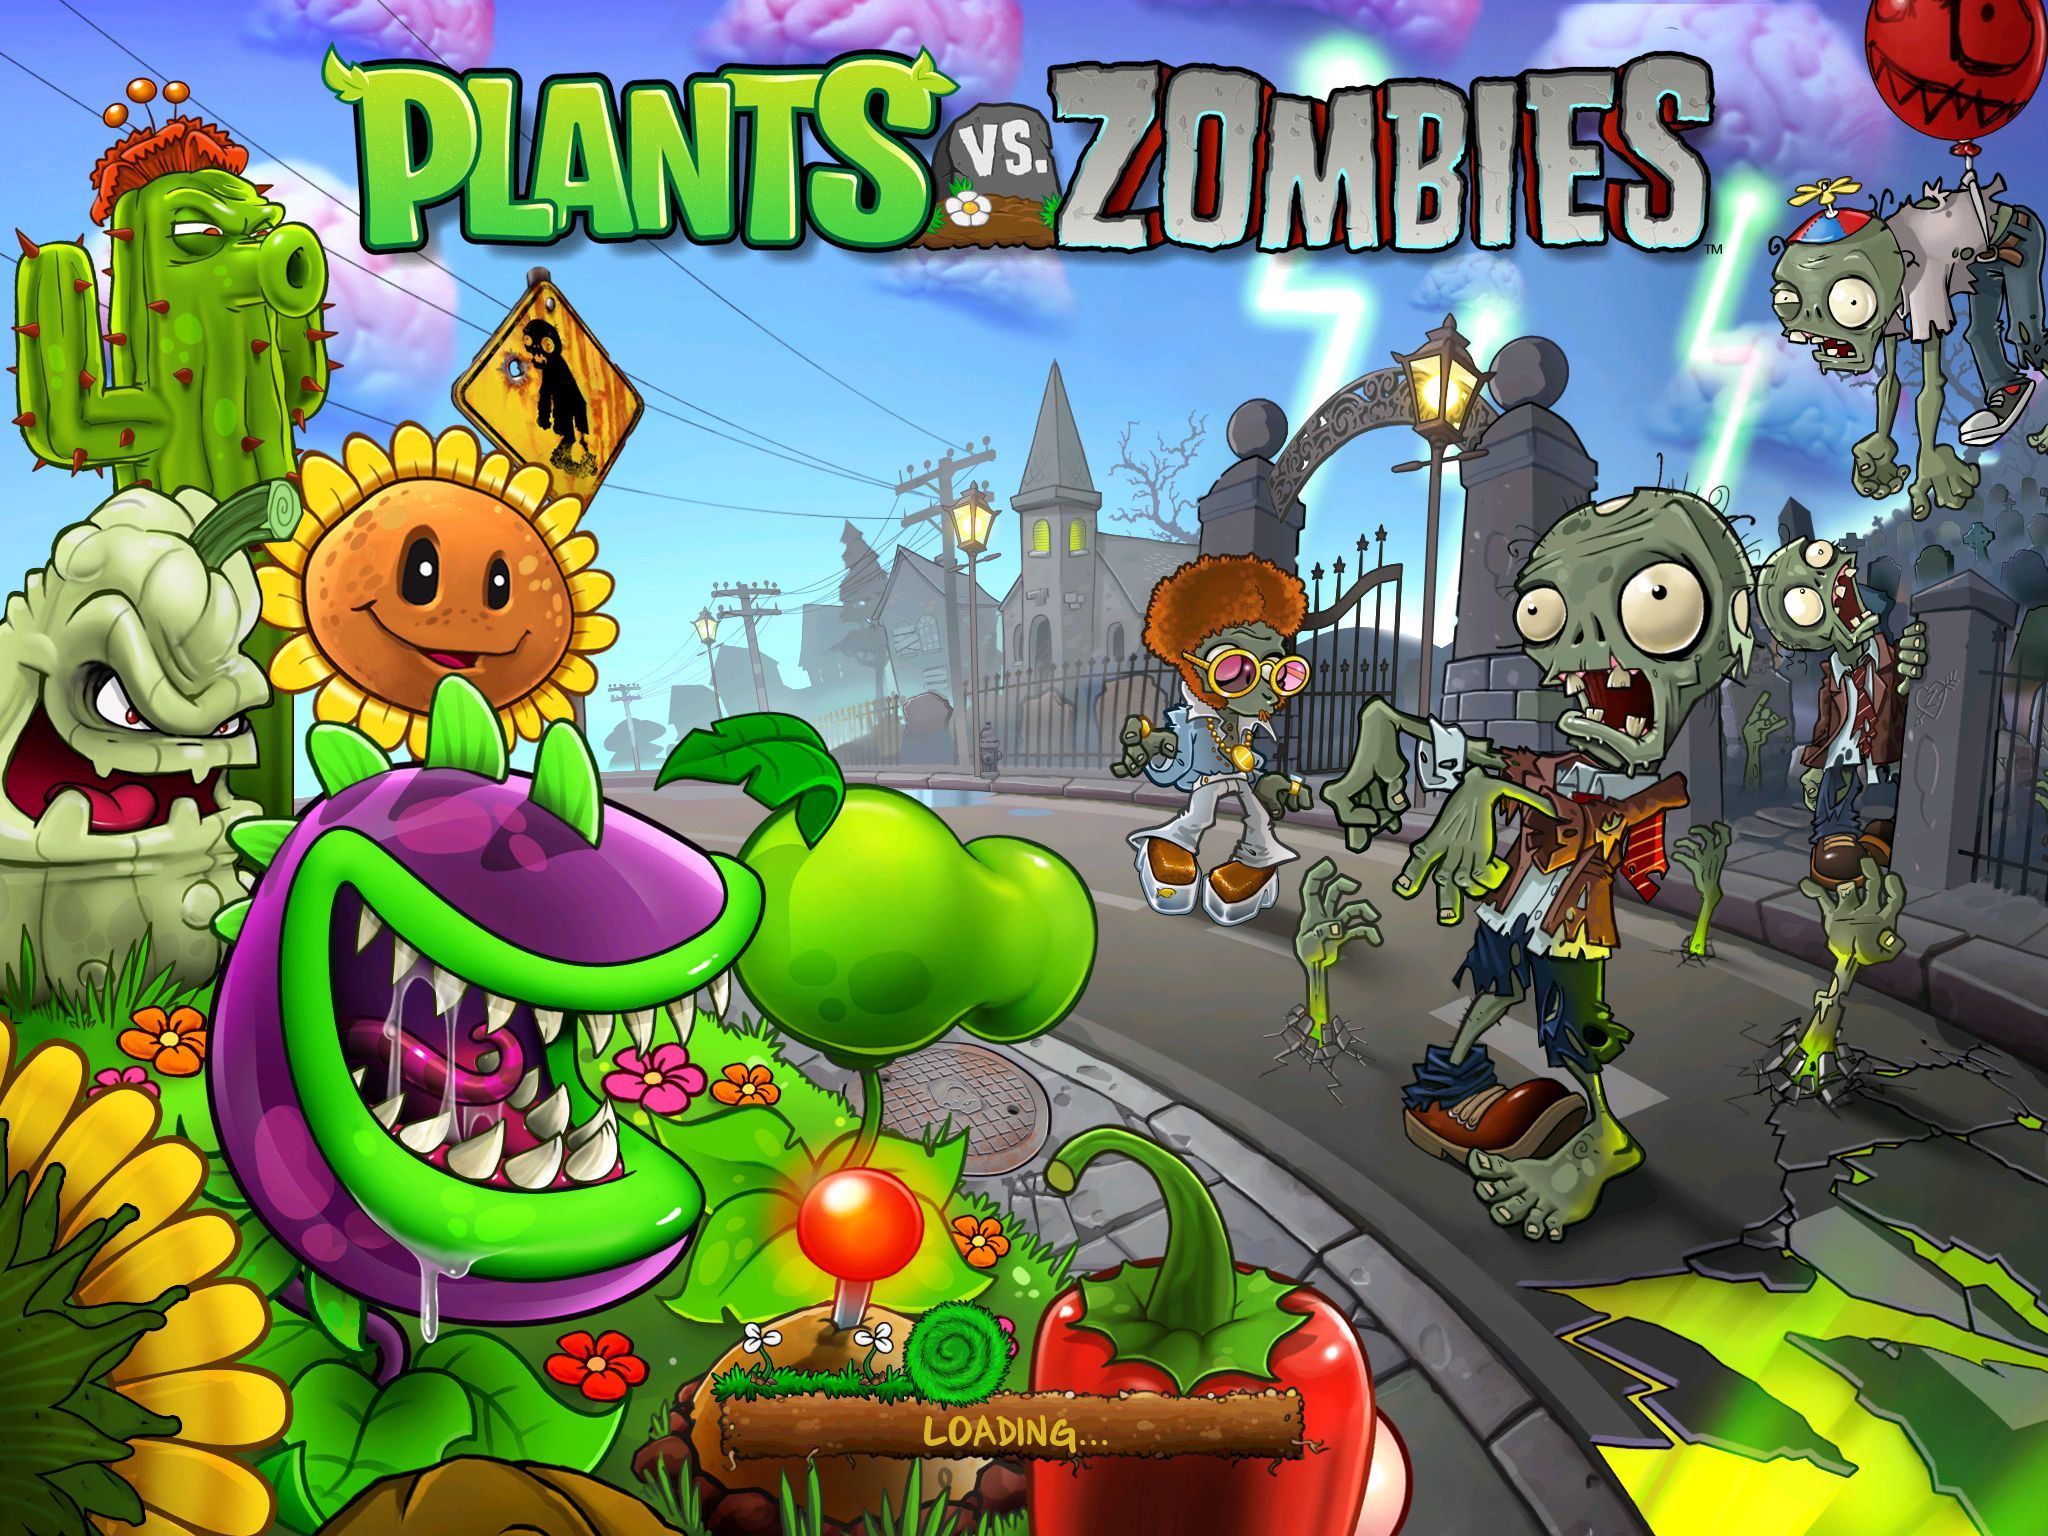 Plants vs Zombies HD is now Free for iPad (Limited time)!